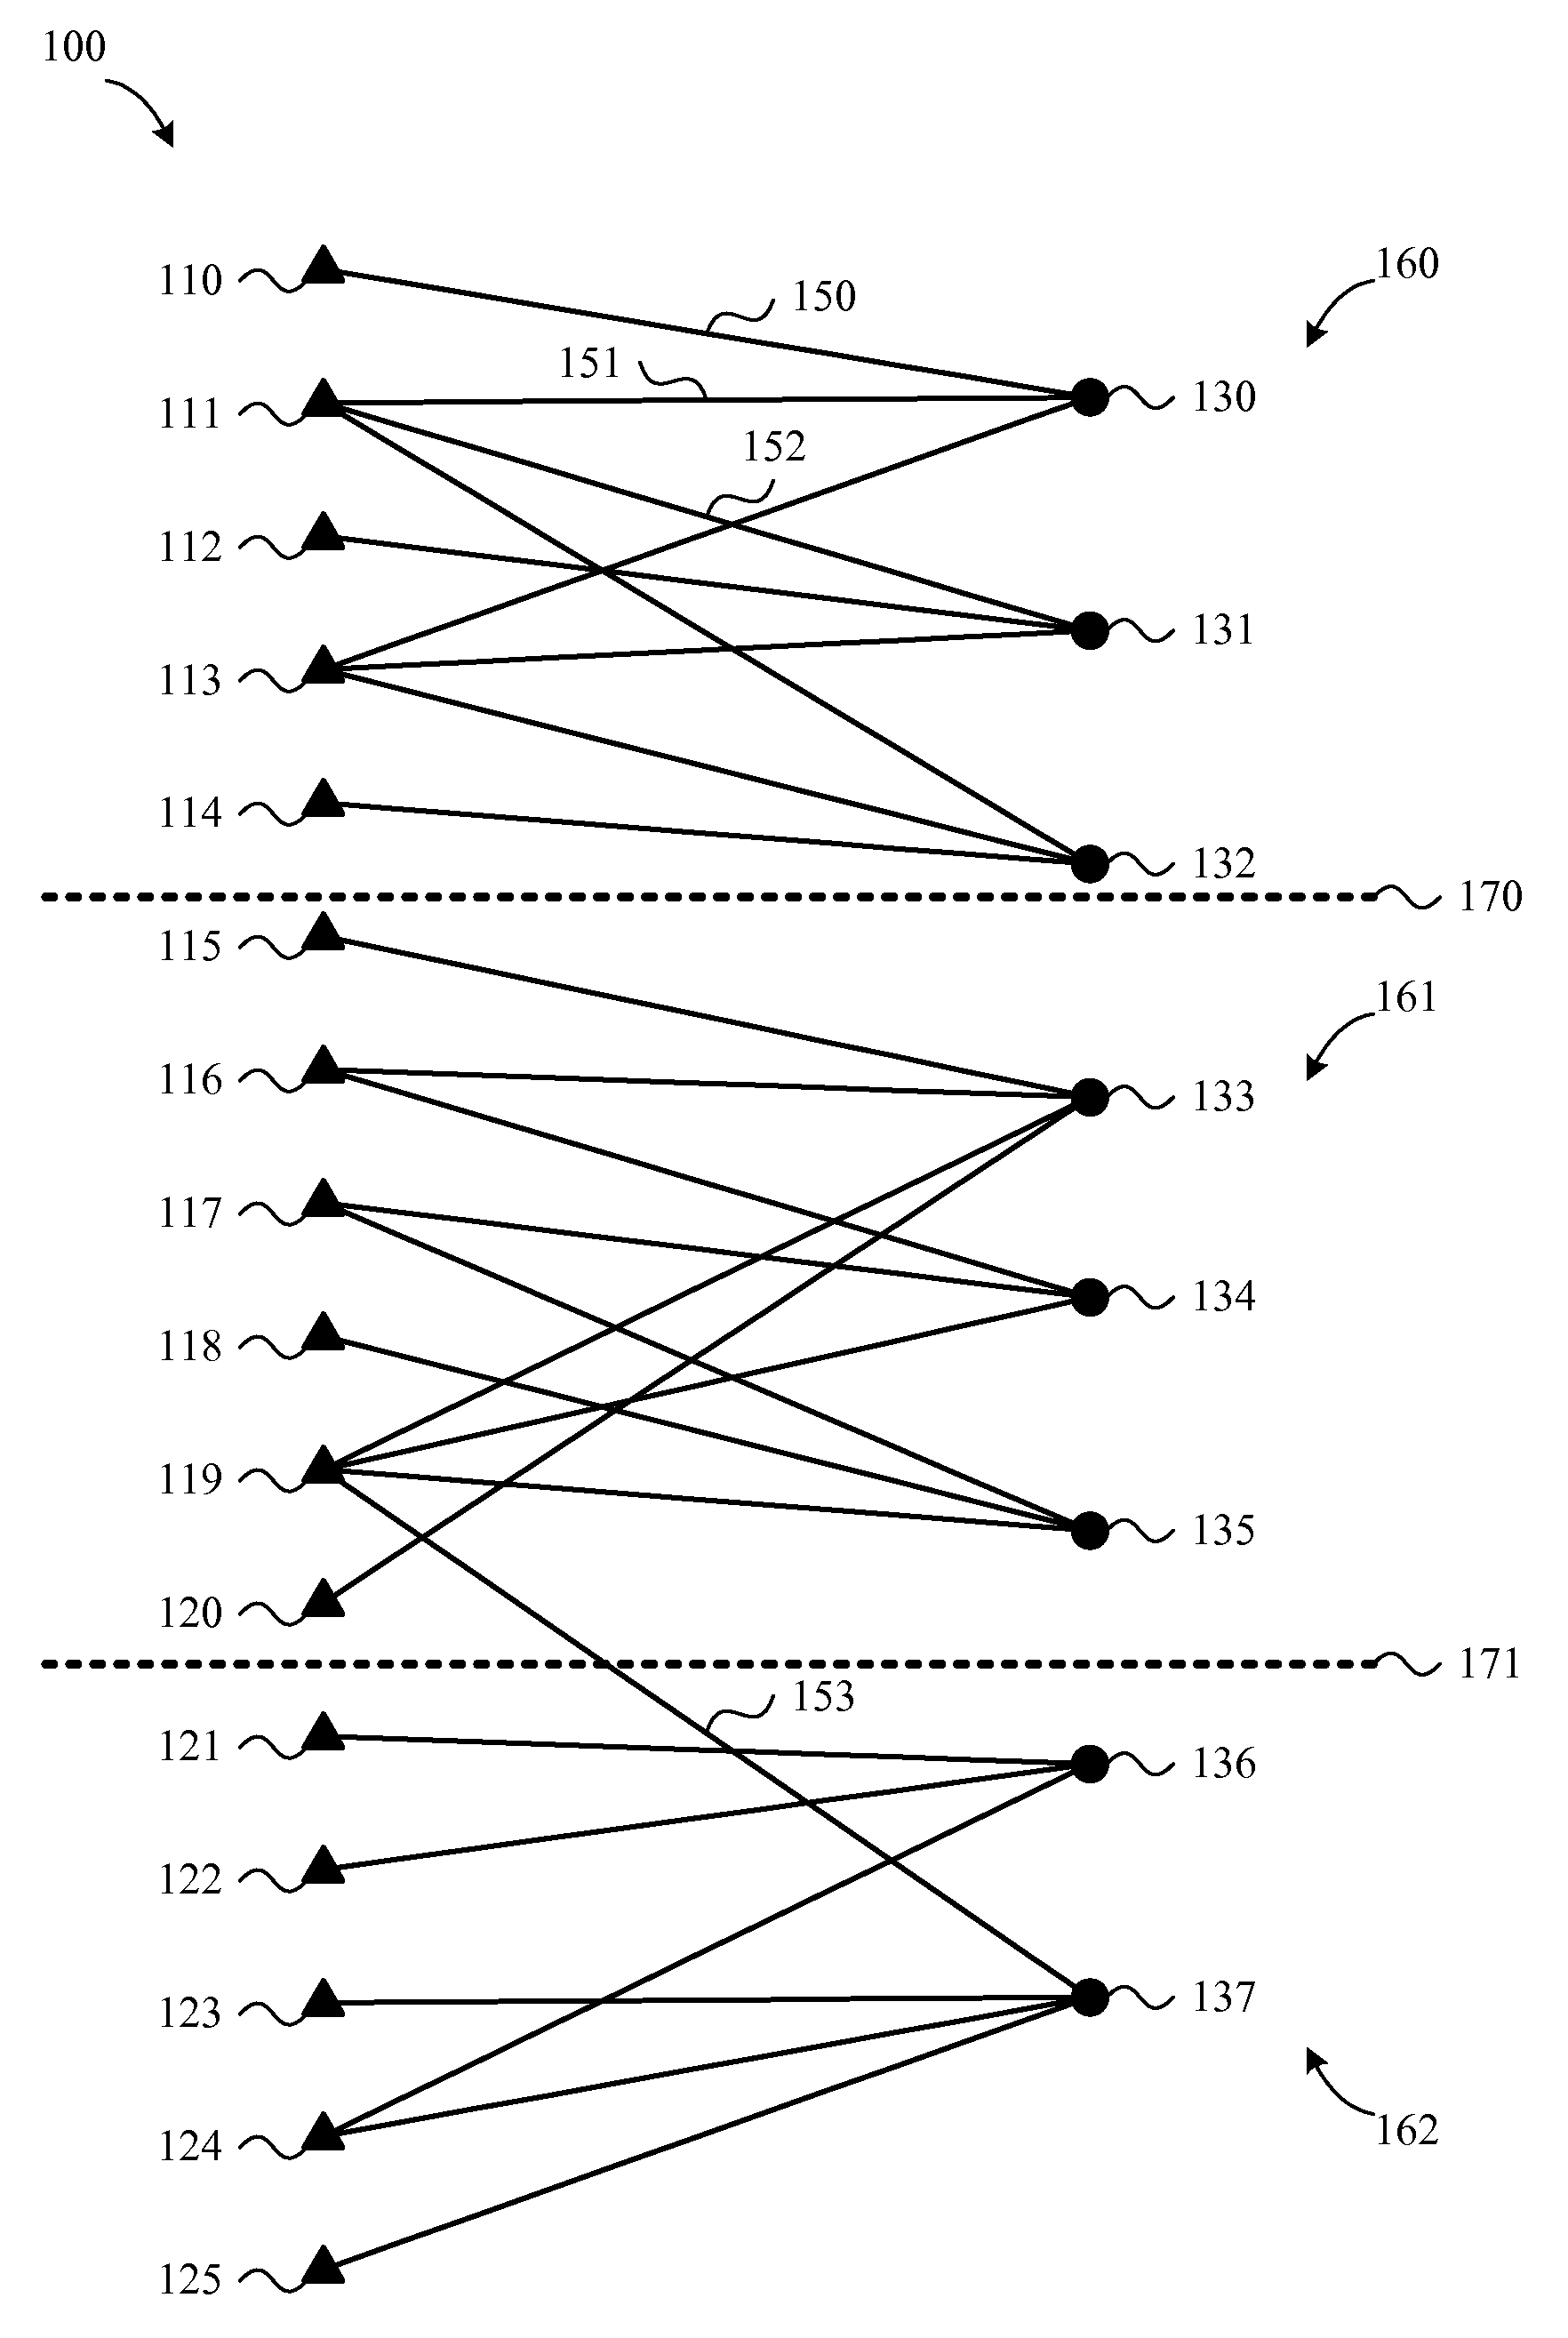 Locating dense and isolated sub-graphs through constructing auxiliary weighted graph